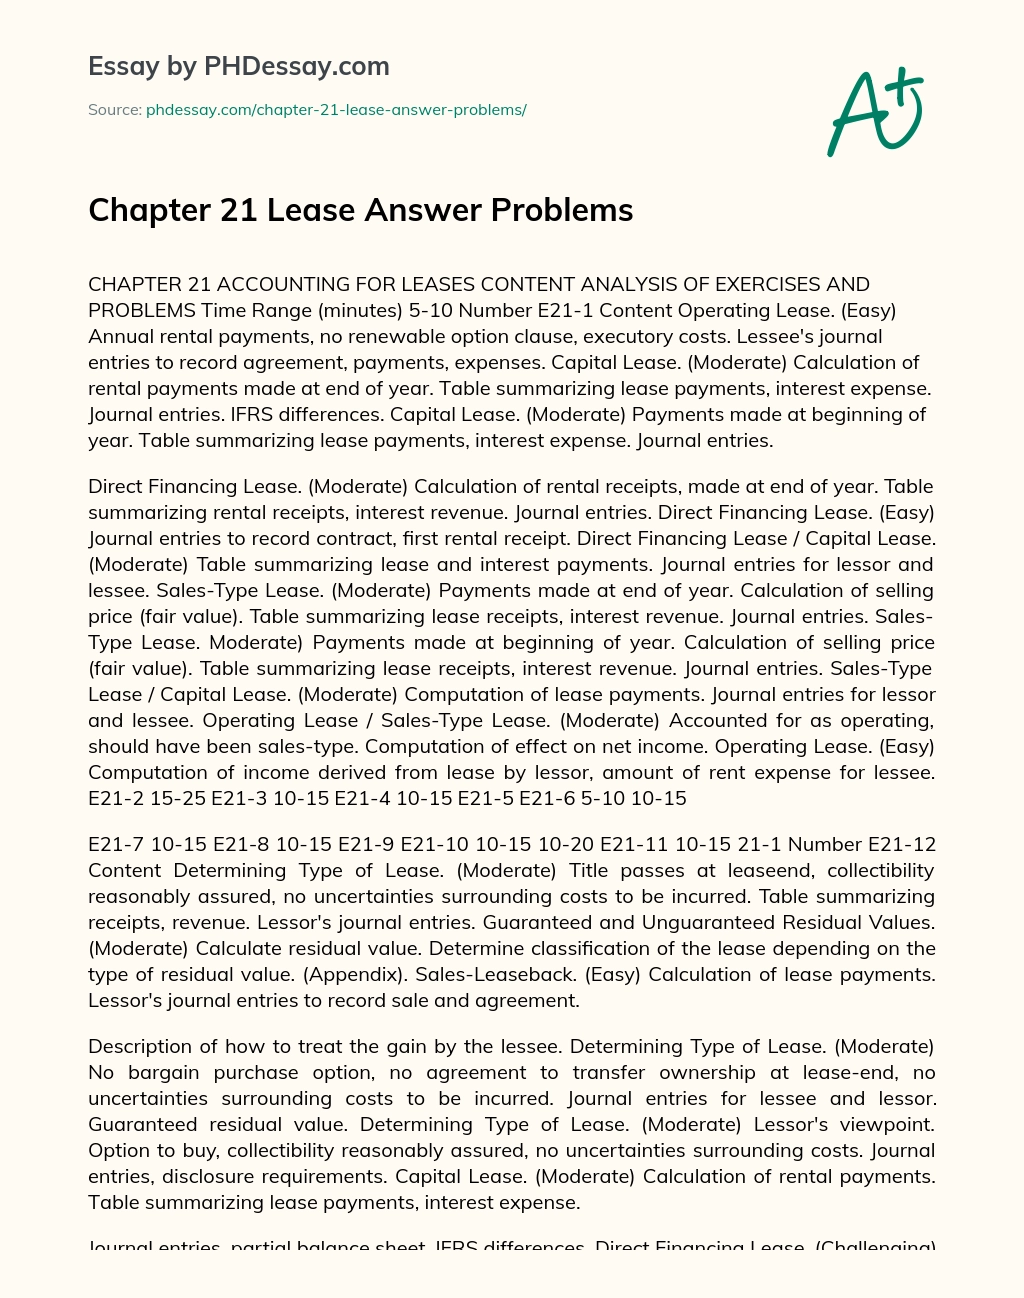 Chapter 21 Lease Answer Problems essay